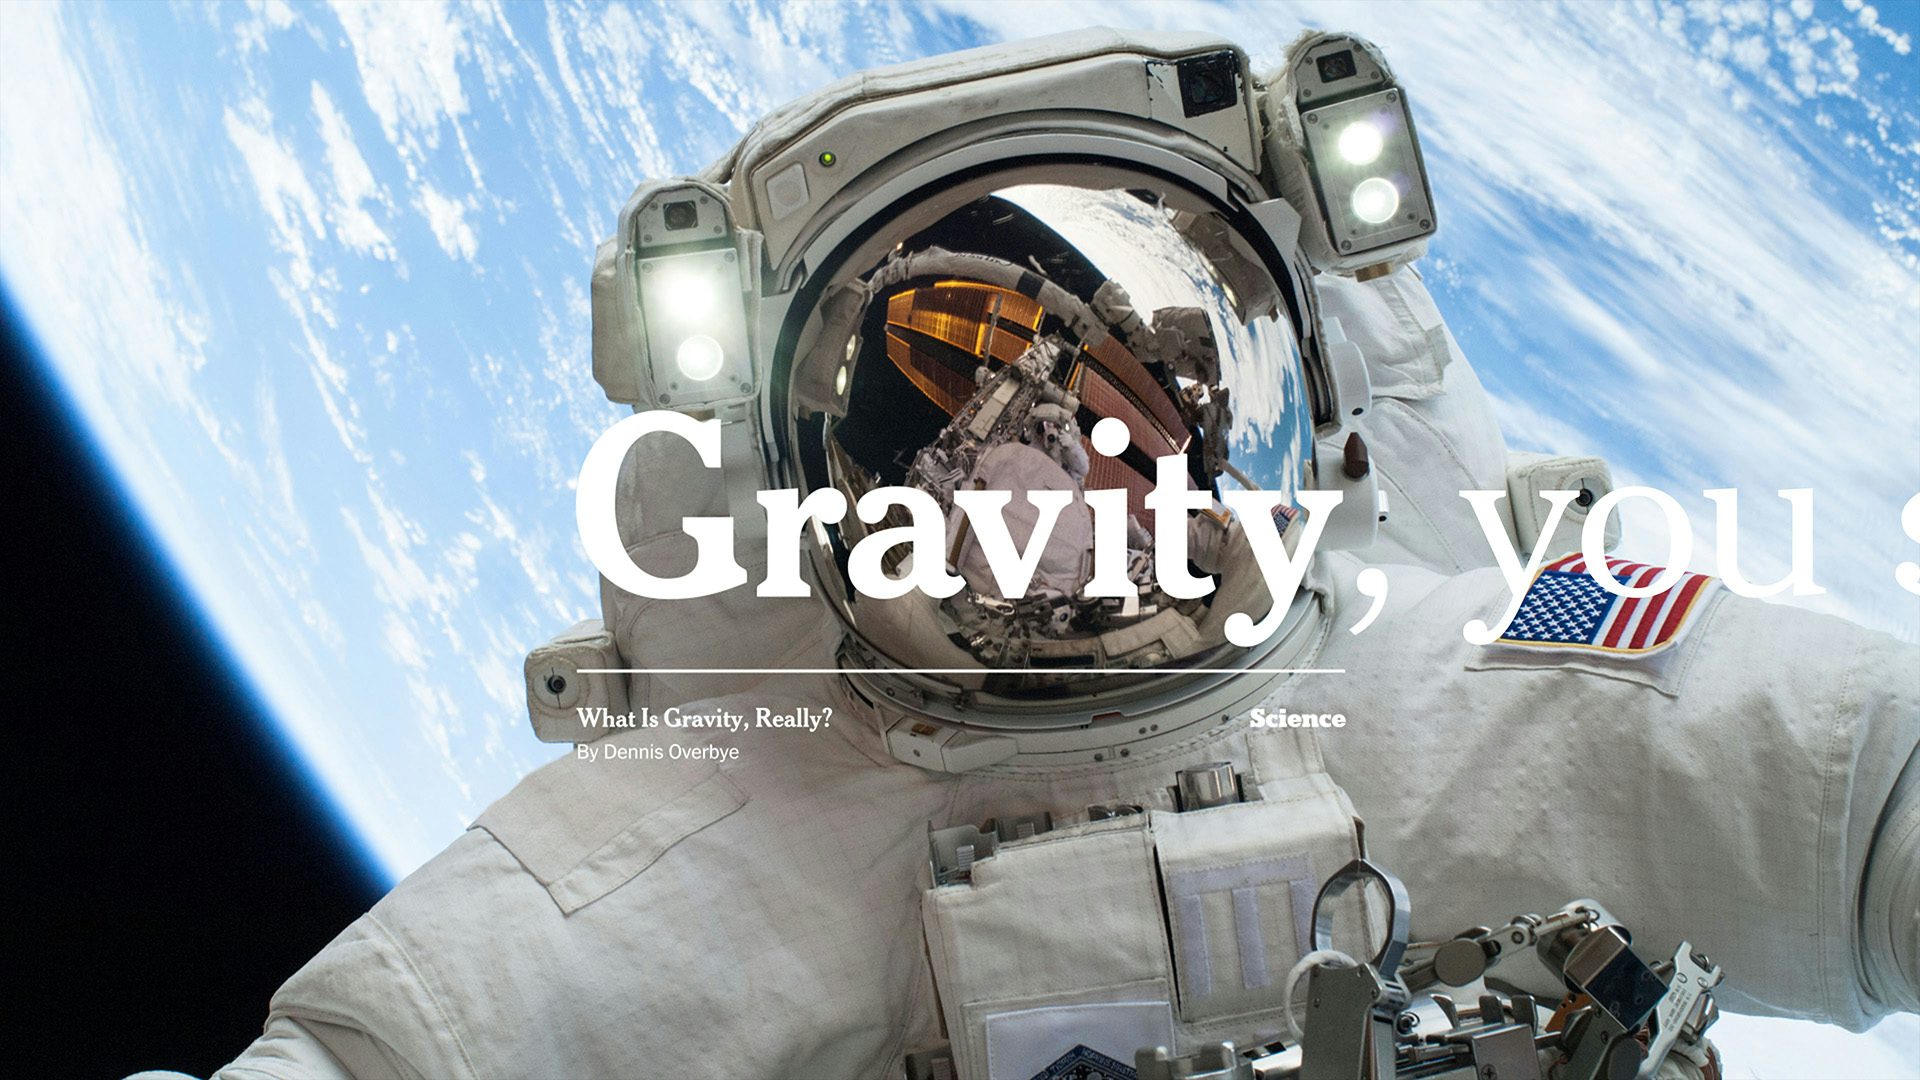 Still image from a New York Times brand campaign film showing an image of a an astronaut in space with the earth visible in the background, and the words 'Gravity, you' layered over the photo